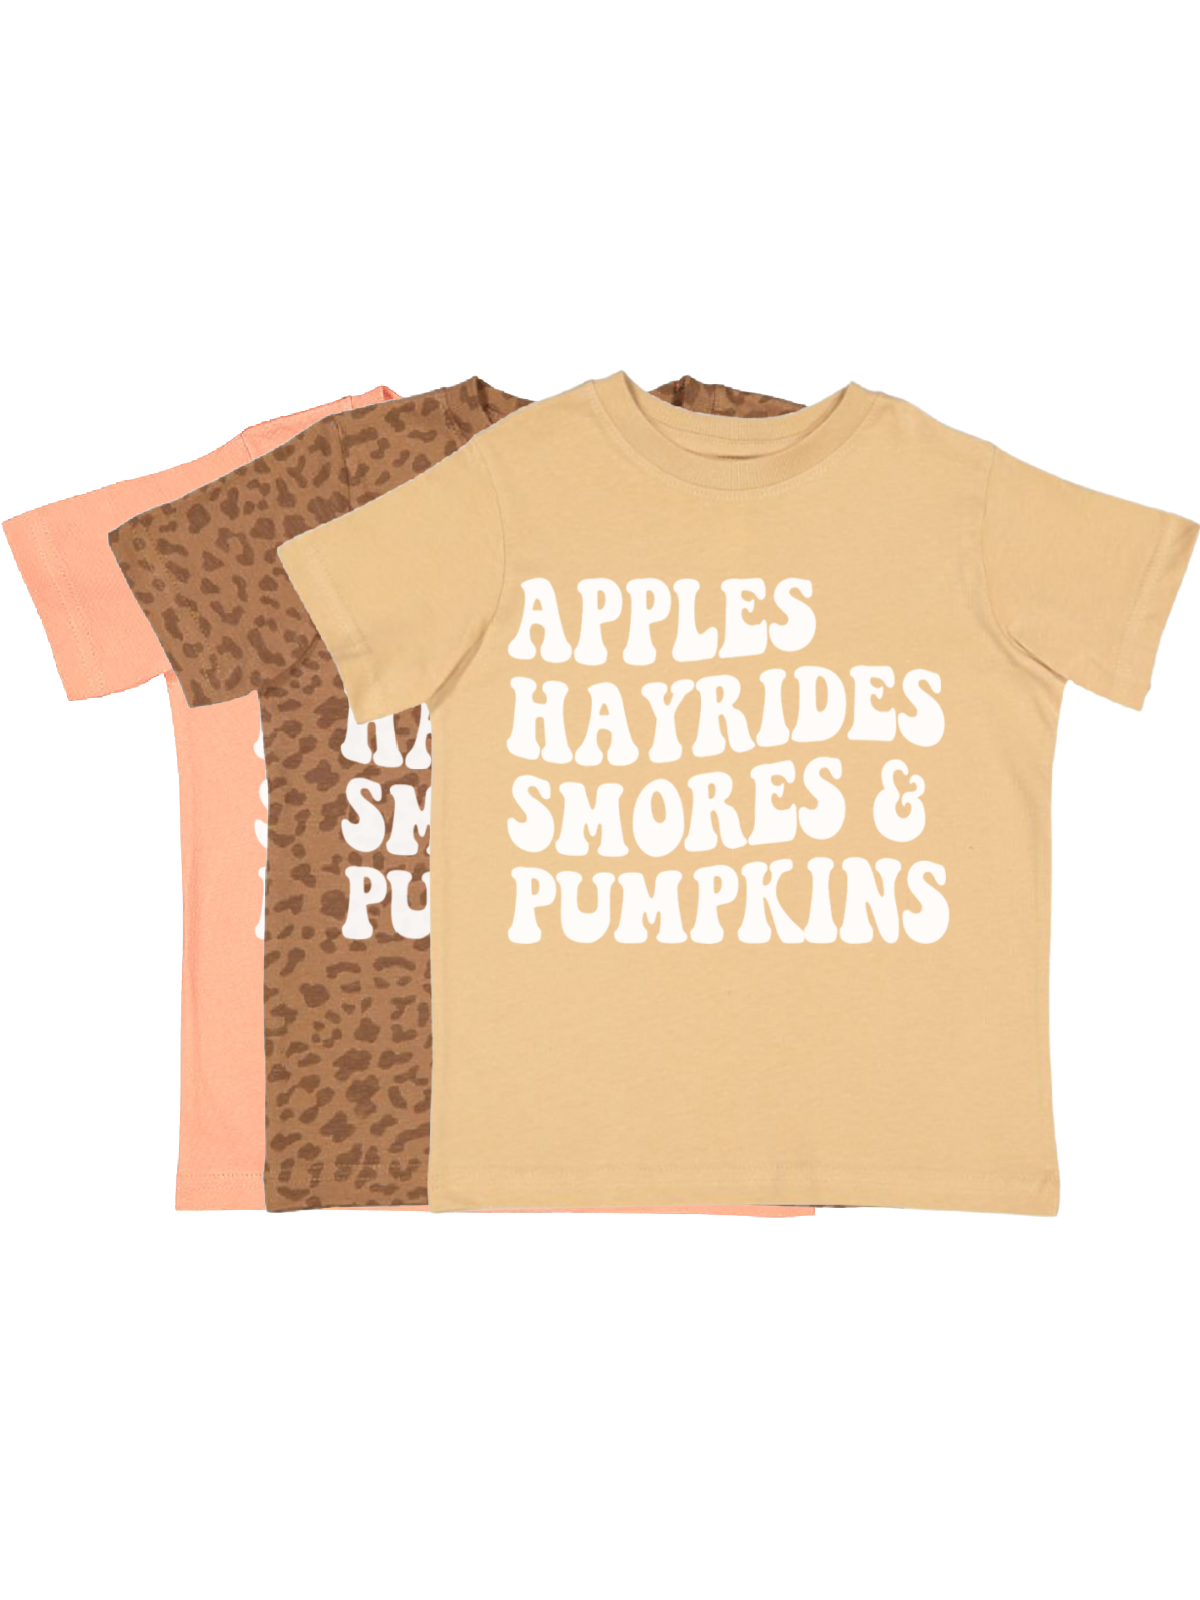 Apples Hayrides Smores and Pumpkins Kids Fall Shirts in Latte Leopard Print and Peach